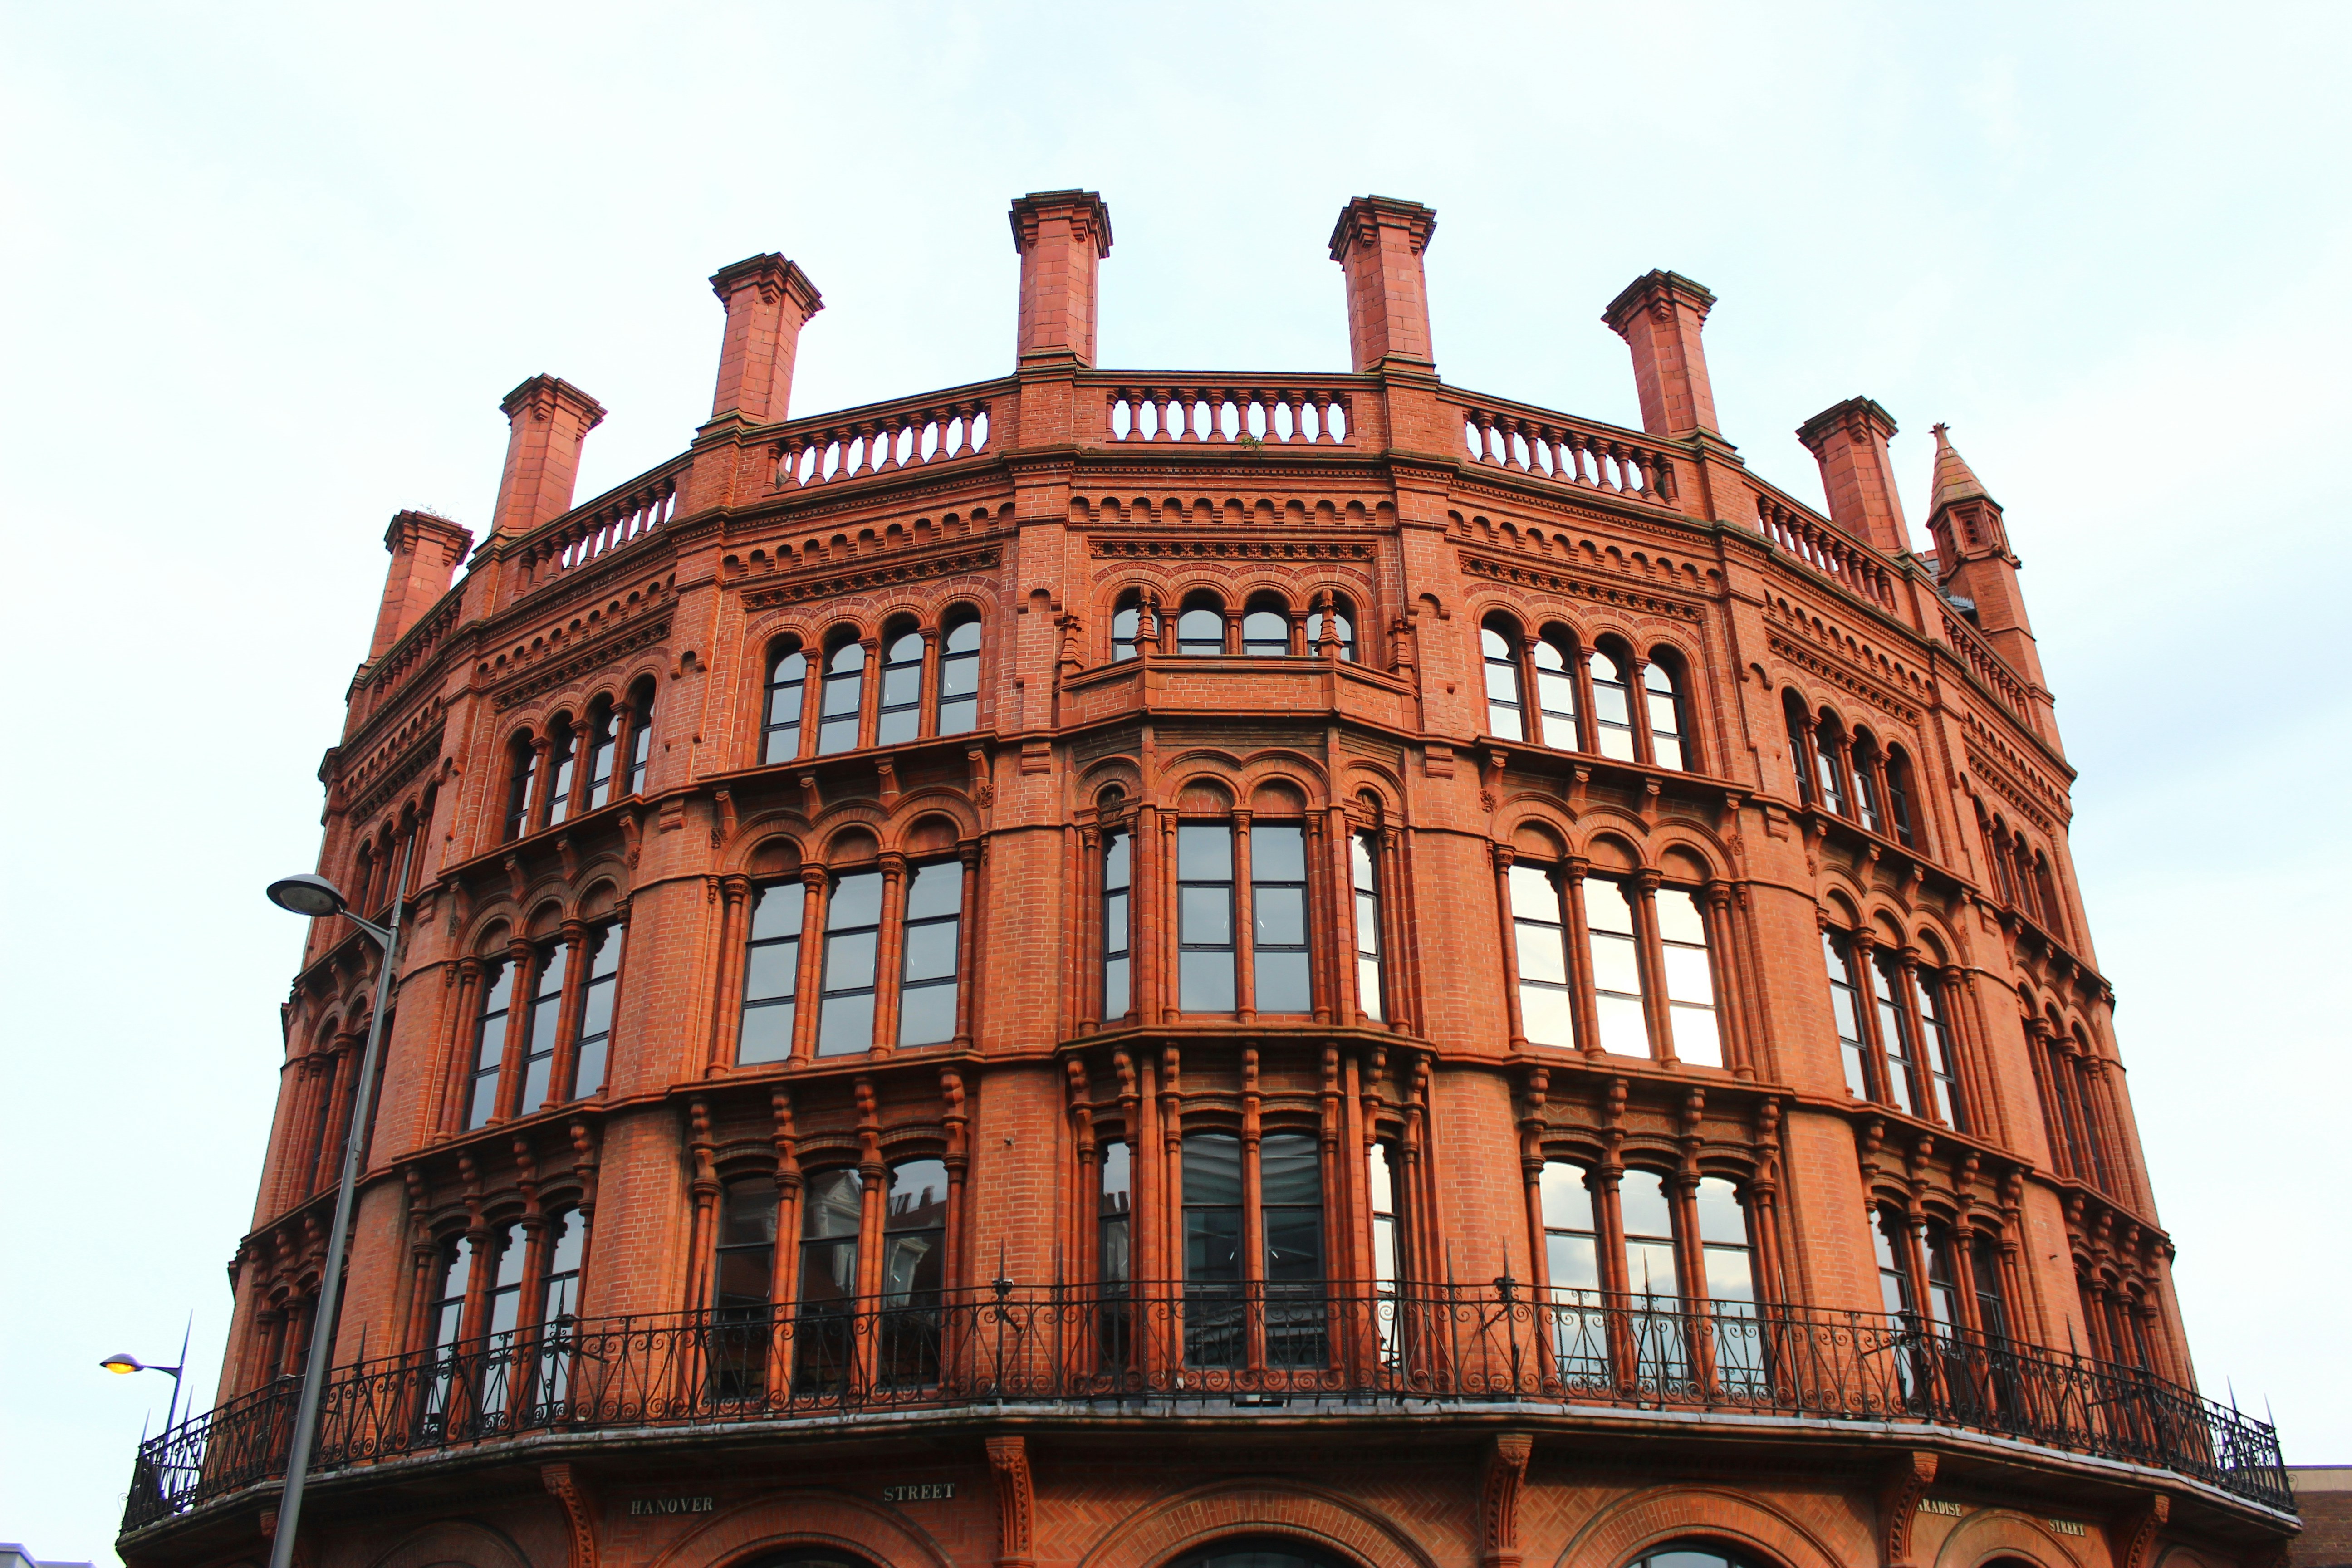 Round building in Liverpool, England